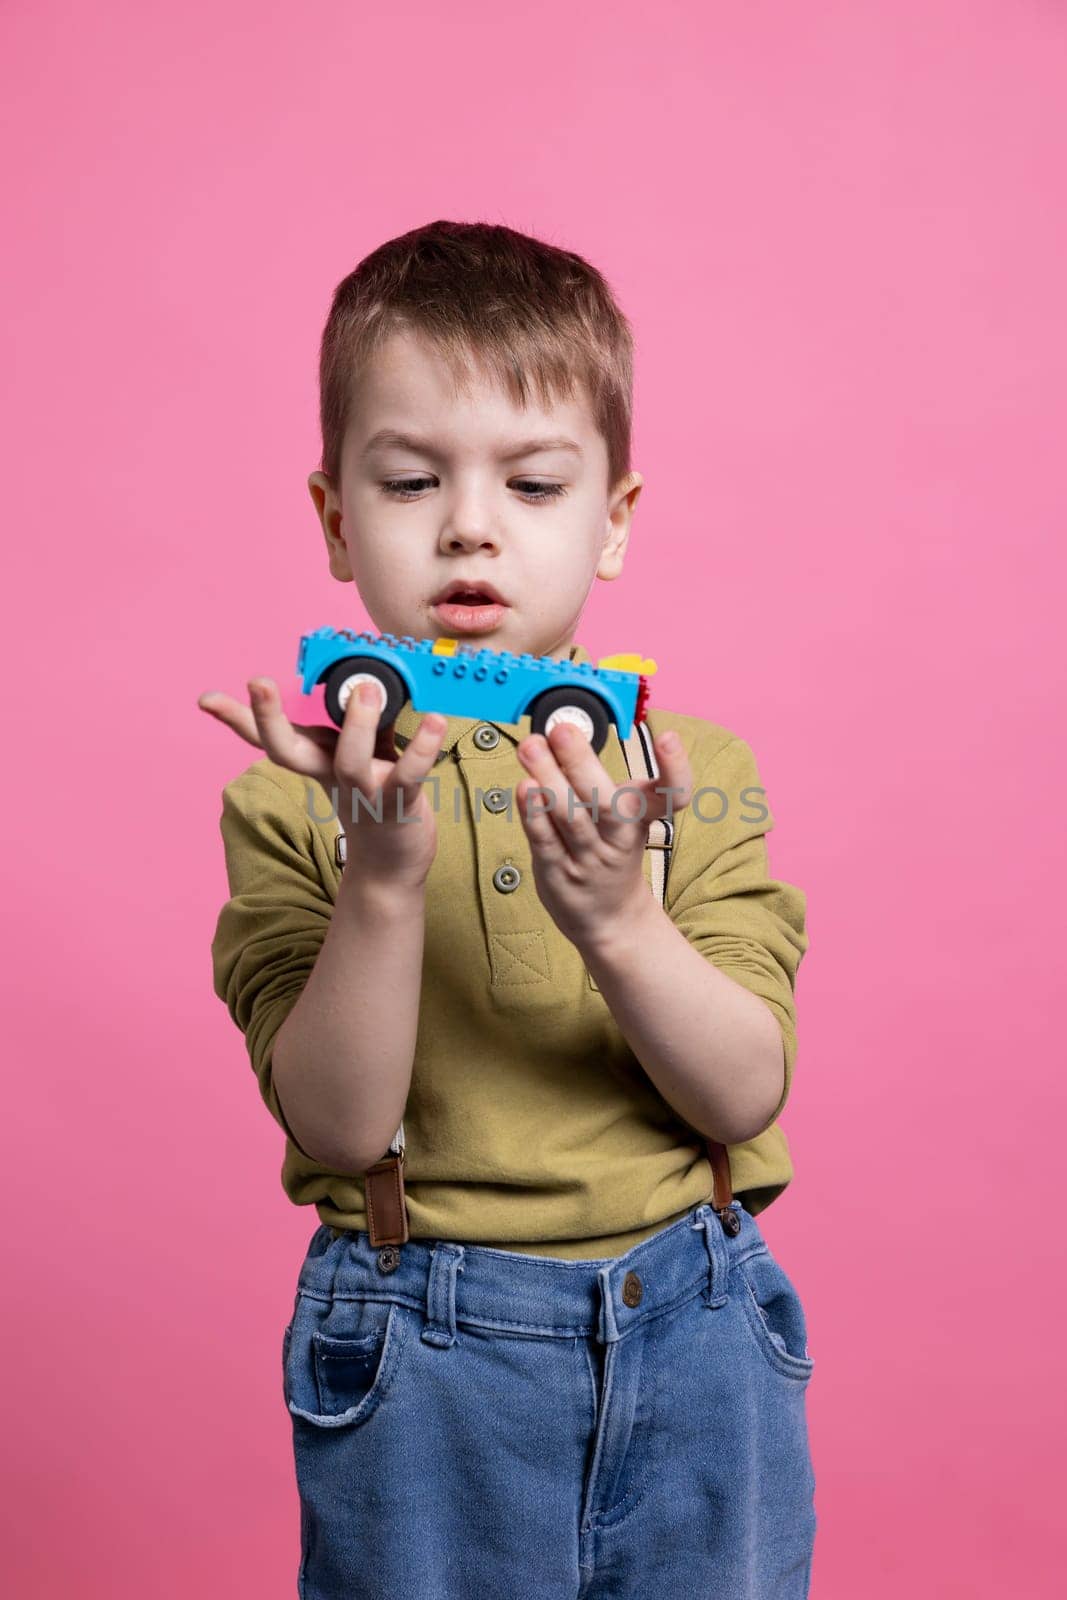 Small young boy playing with a blue vehicle toy in studio by DCStudio